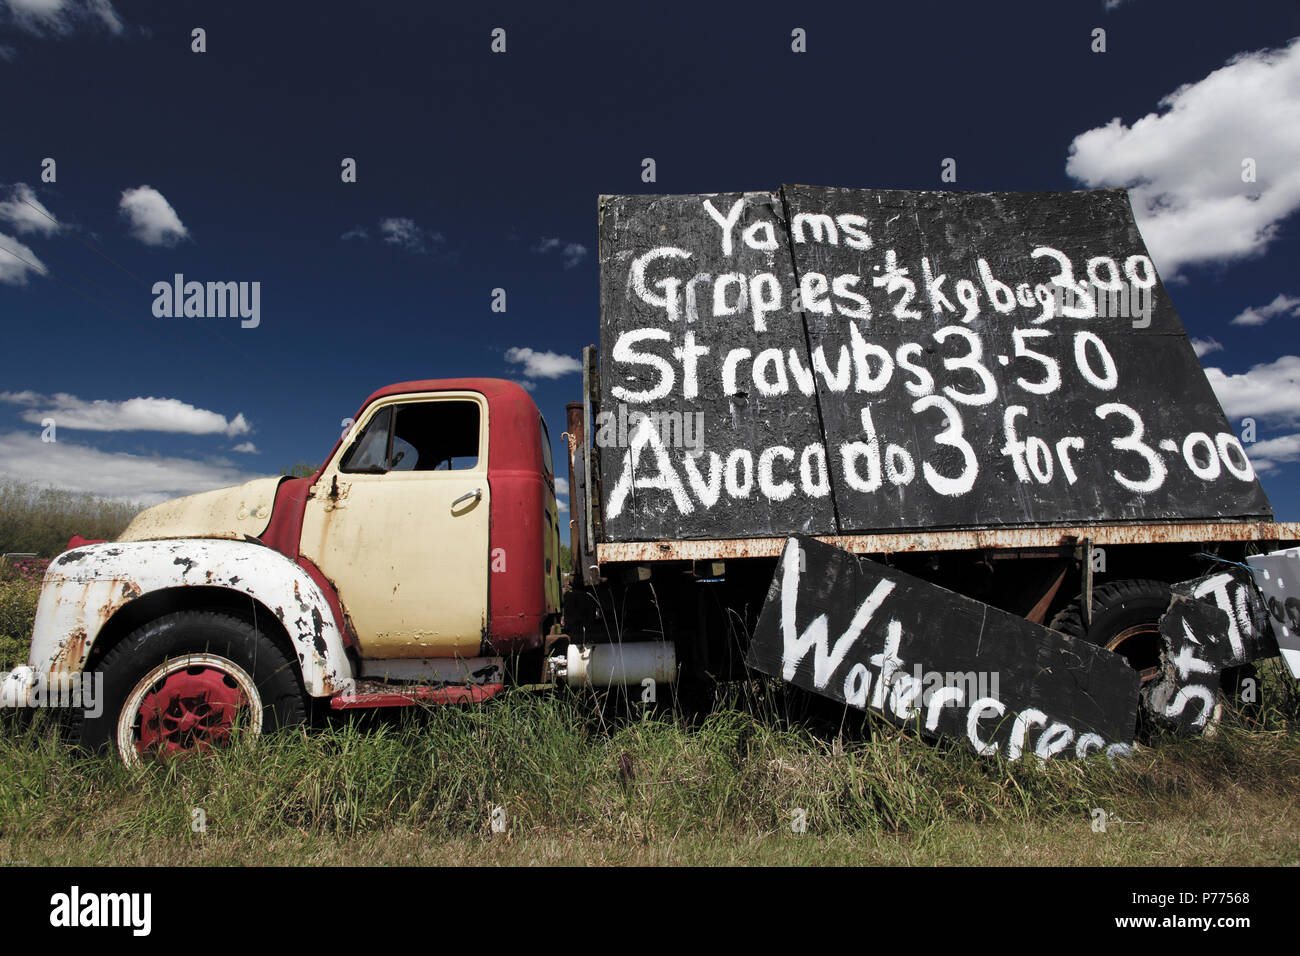 Vintage truck with advertising blackboard sign promoting fresh fruit and vegetables for sale in Foxton, New Zealand Stock Photo